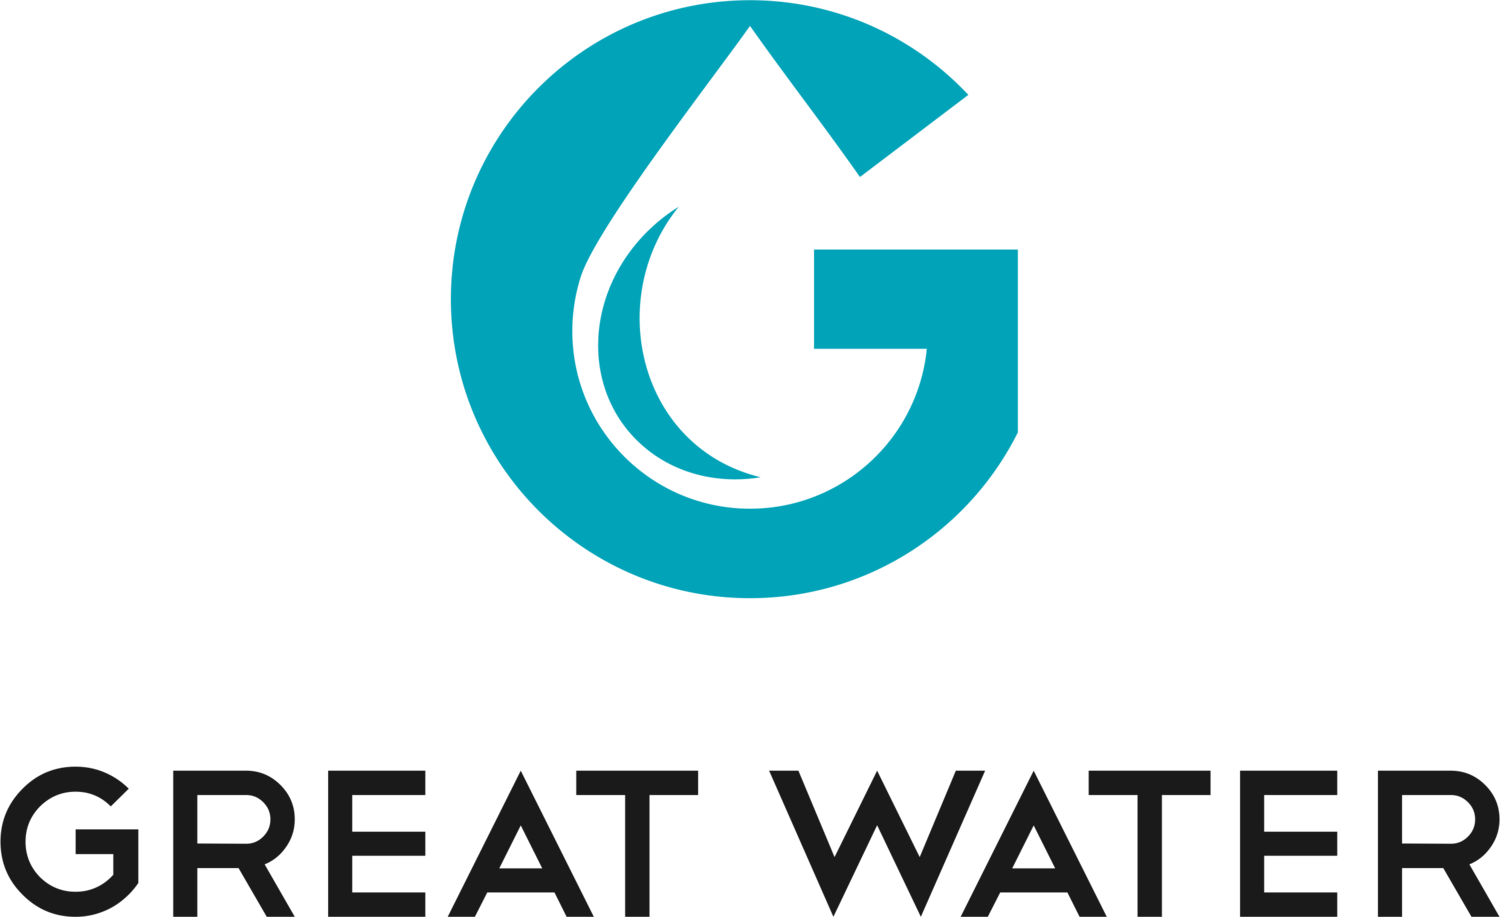 Great-Water